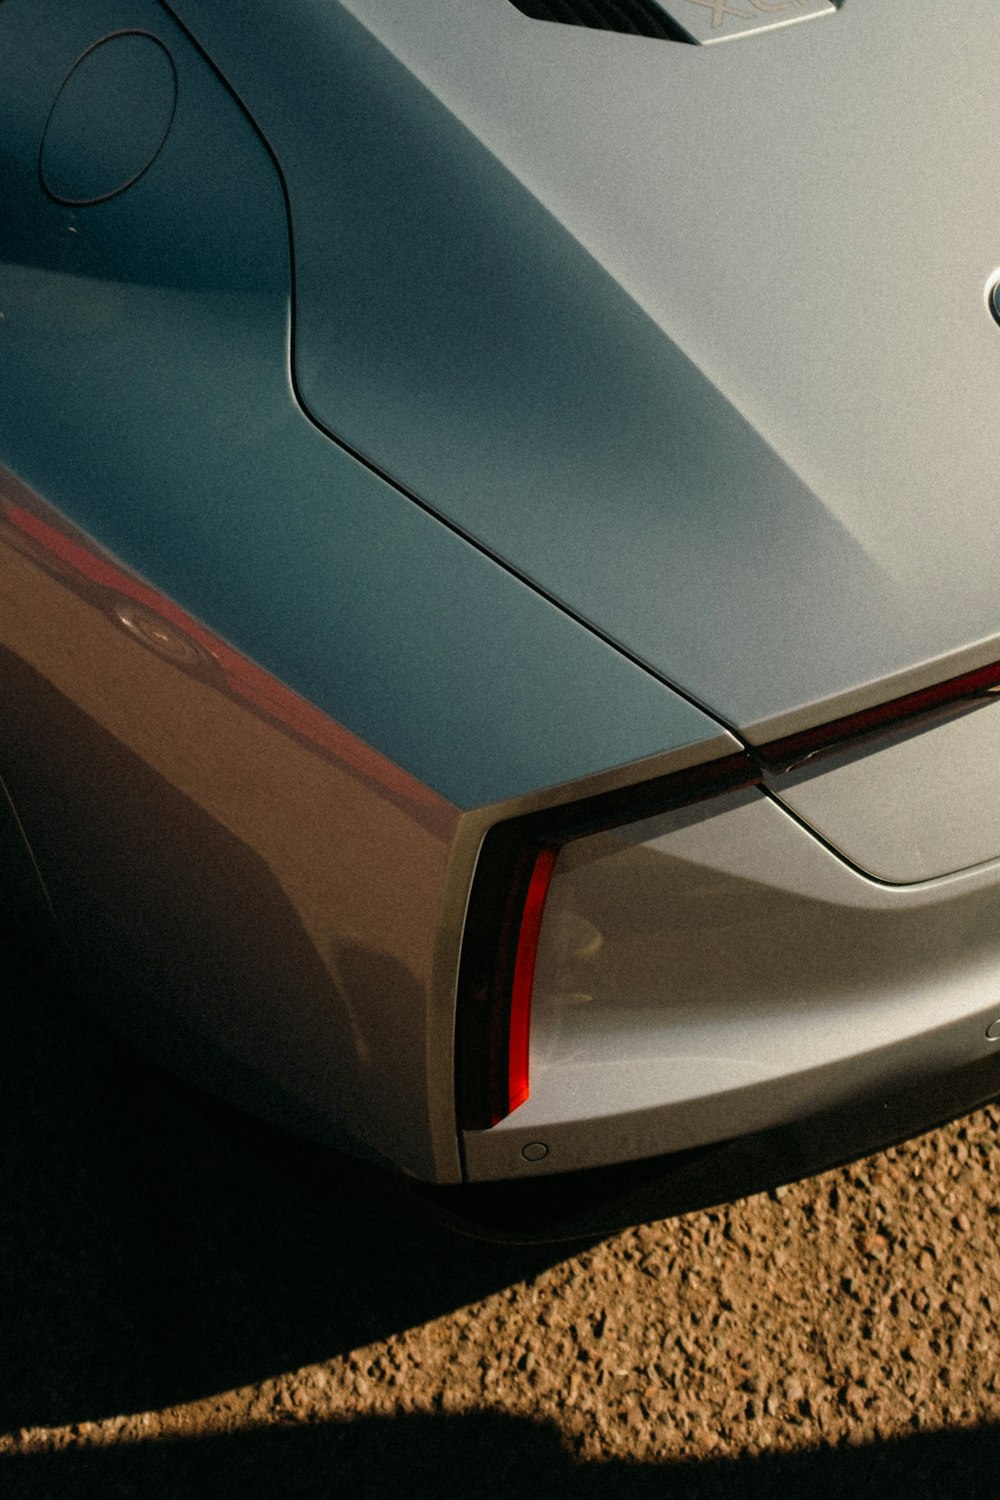 a close up of the tail end of a sports car